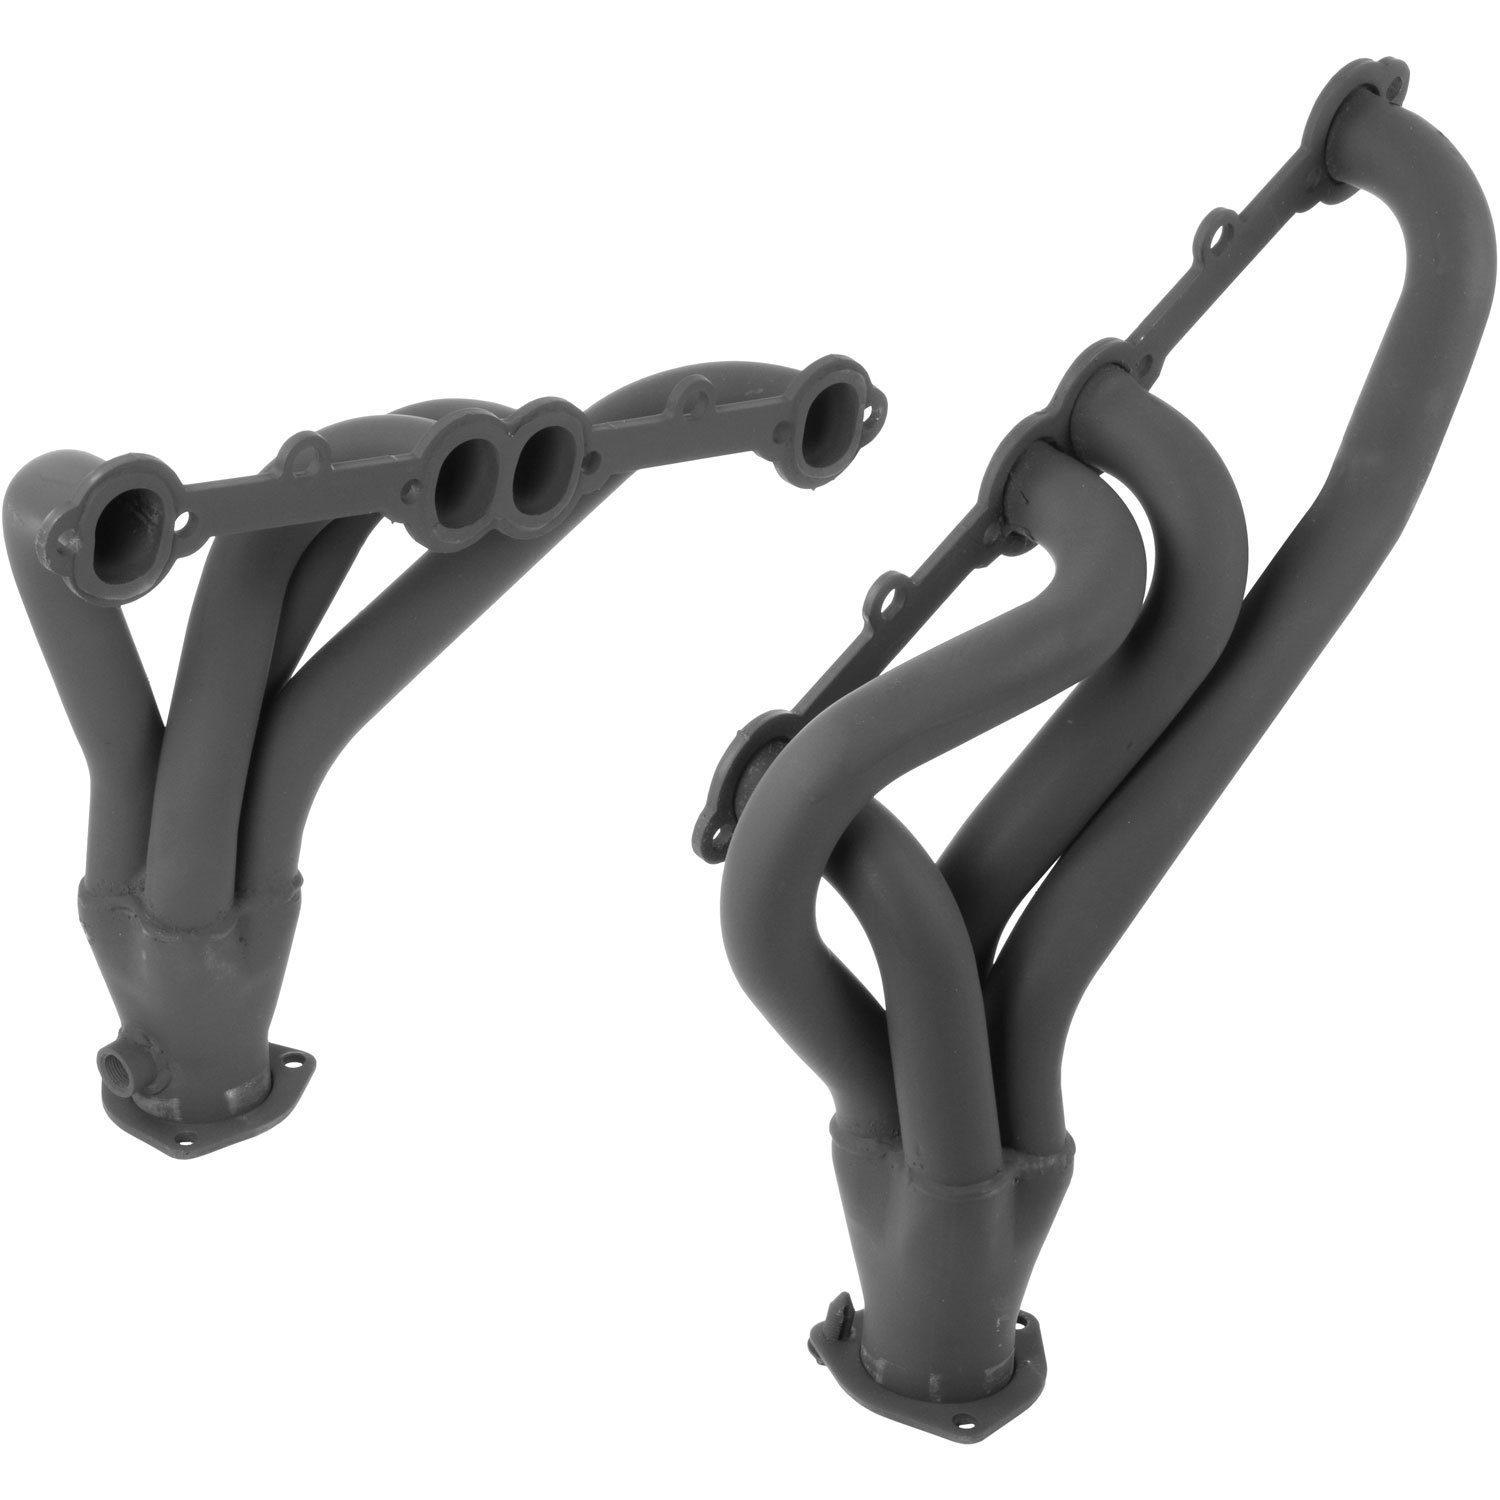 Painted Shorty Headers for 1978-1991 GM Passenger Cars [Small Block Chevy 305-350 ci]